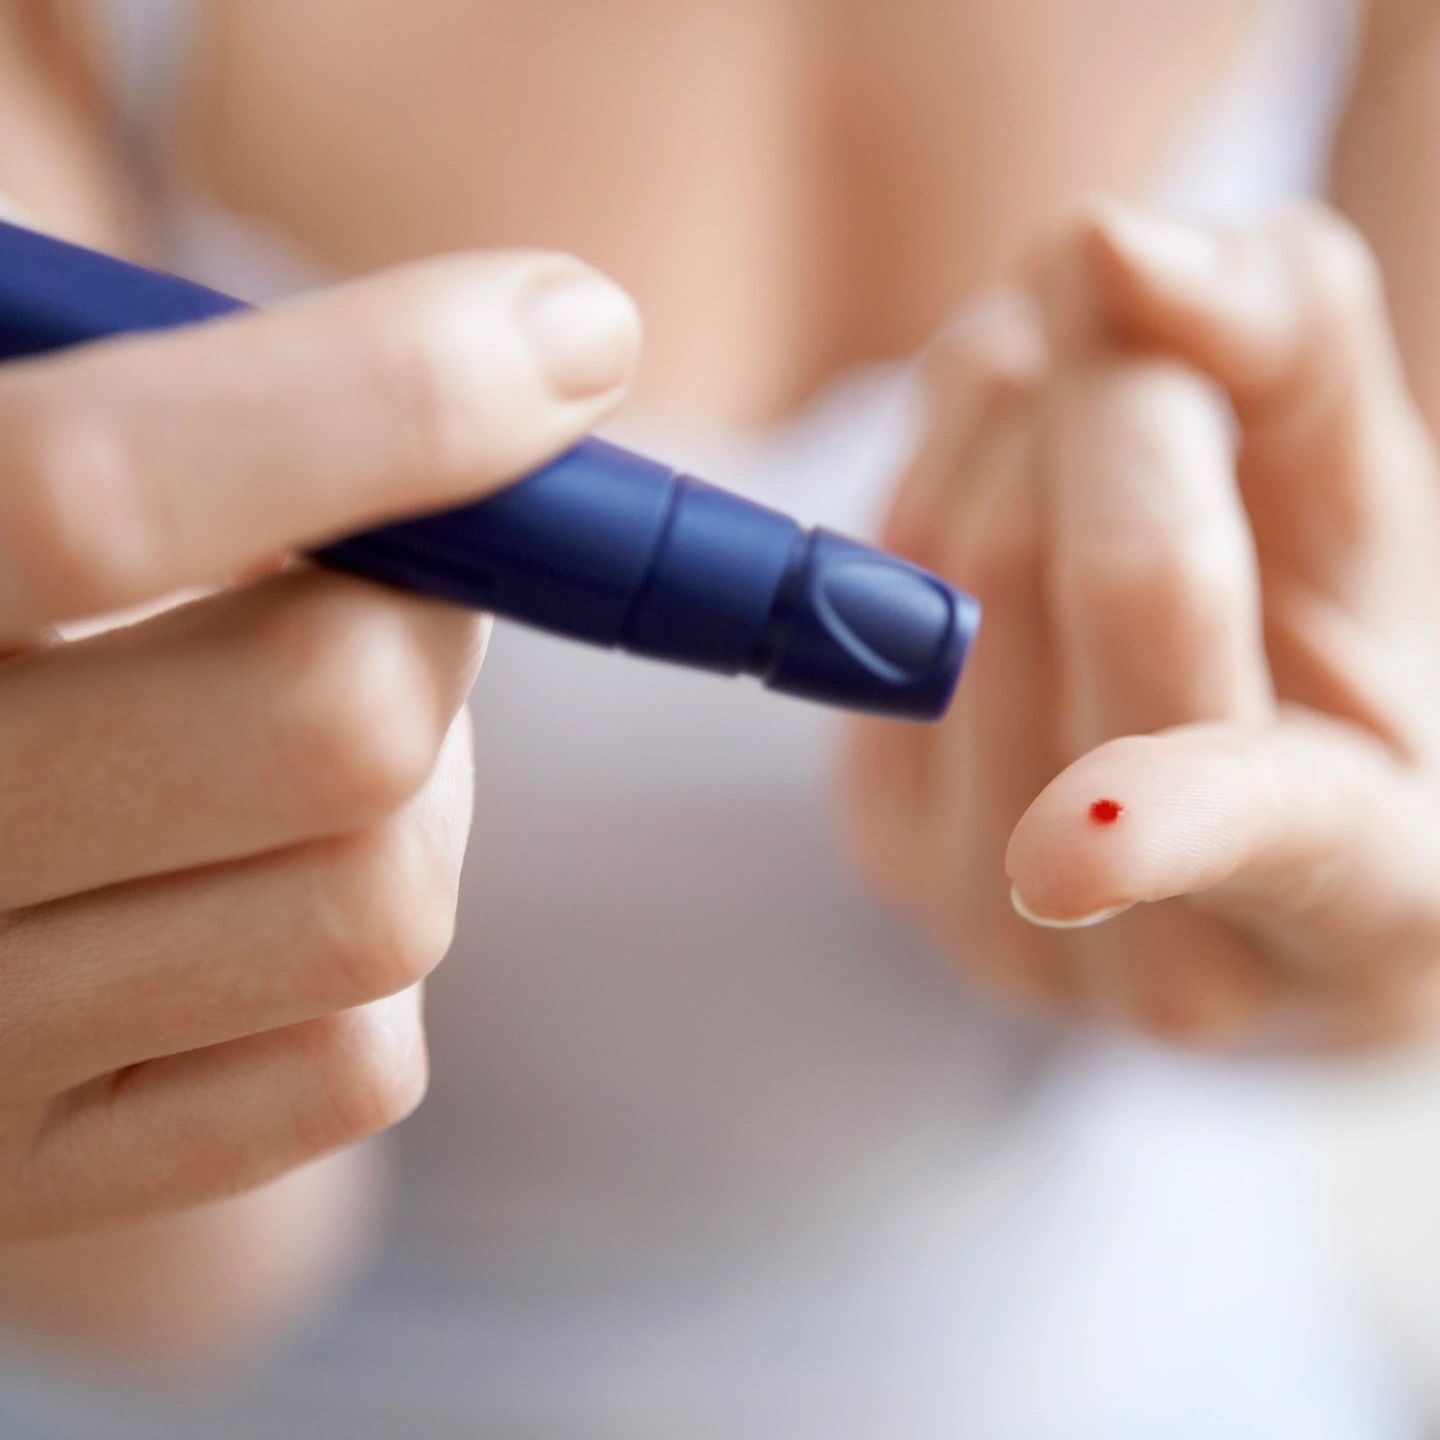 Diabetic Checking Blood Glucose